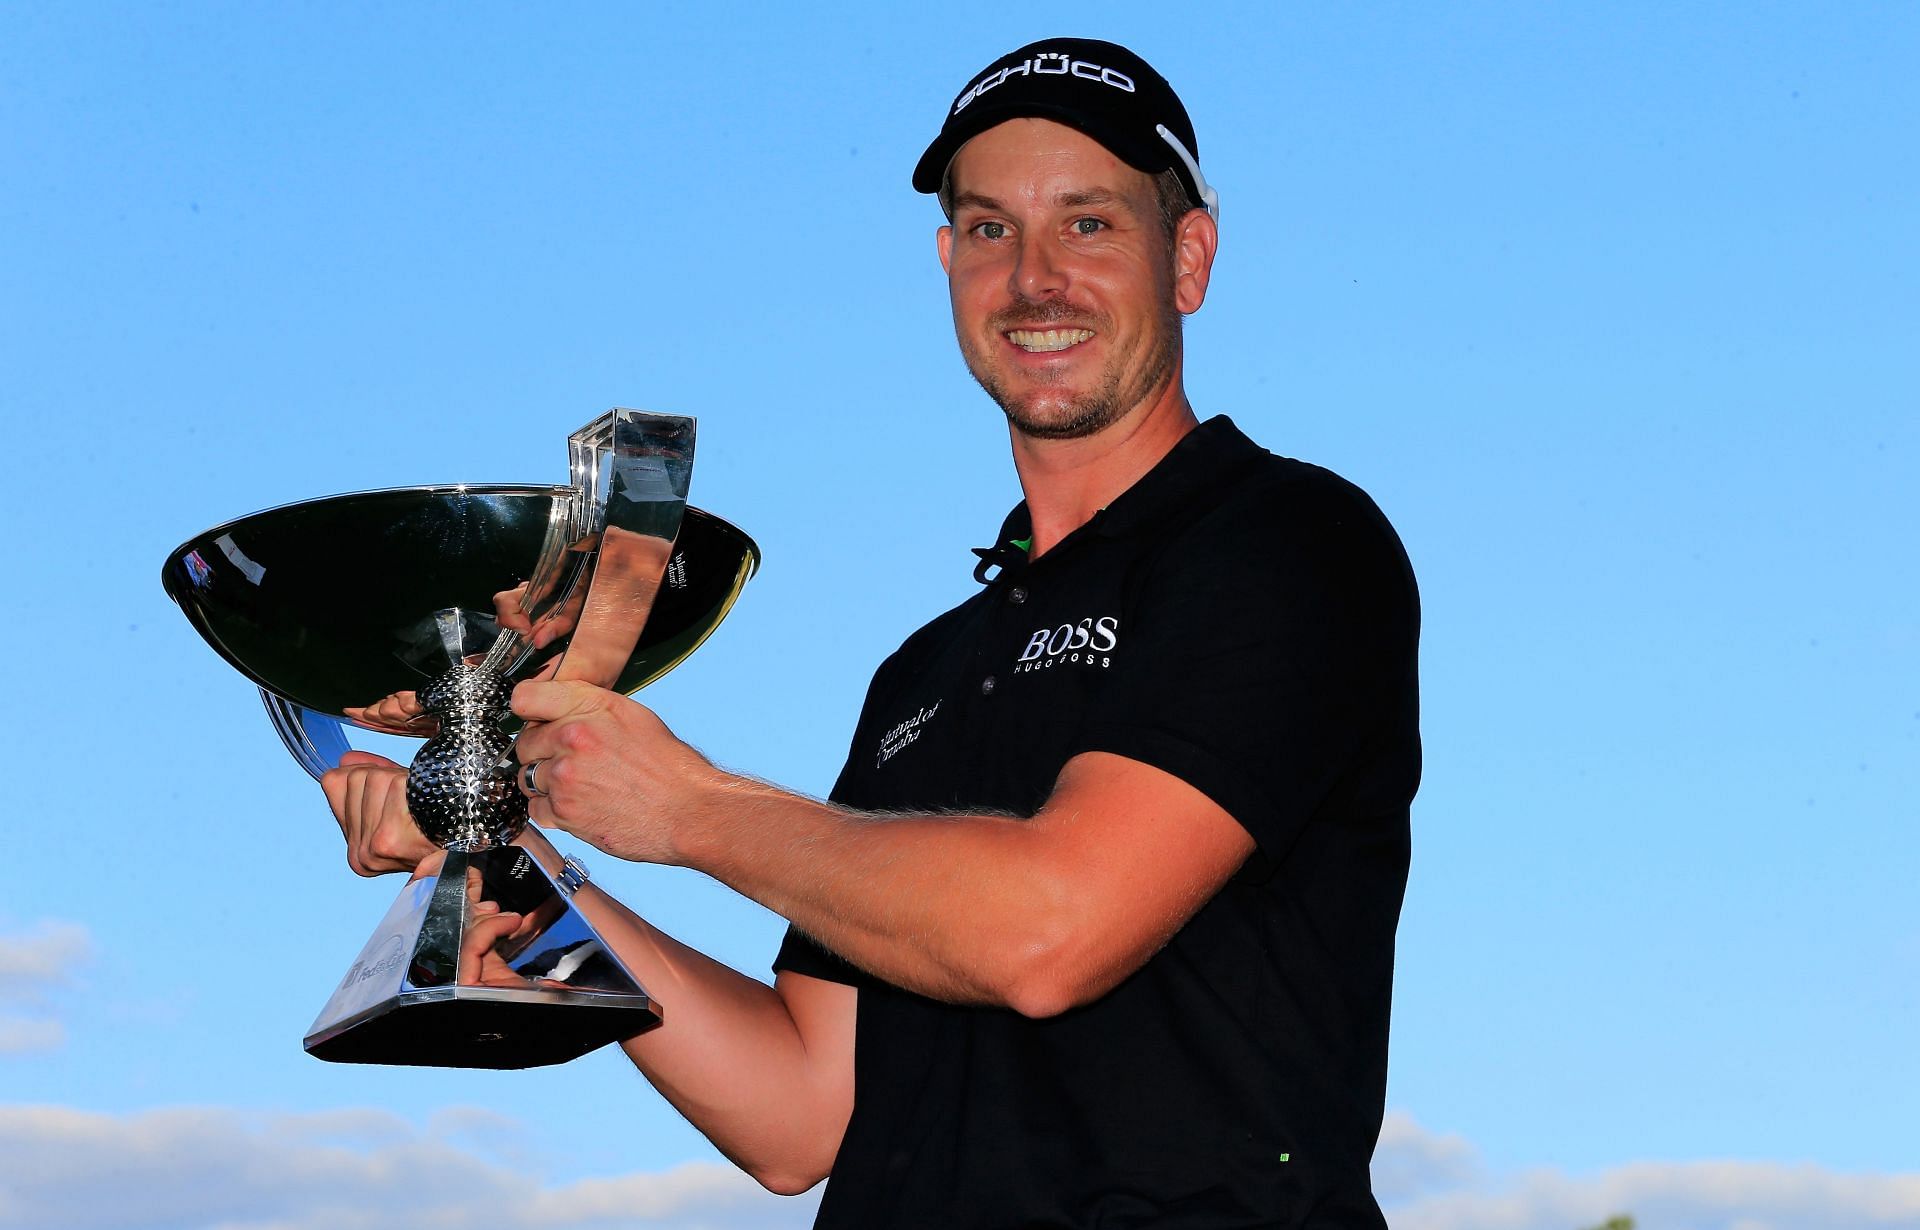 Henrik Stenson poses with the FedEx Cup trophy (Image via Getty)